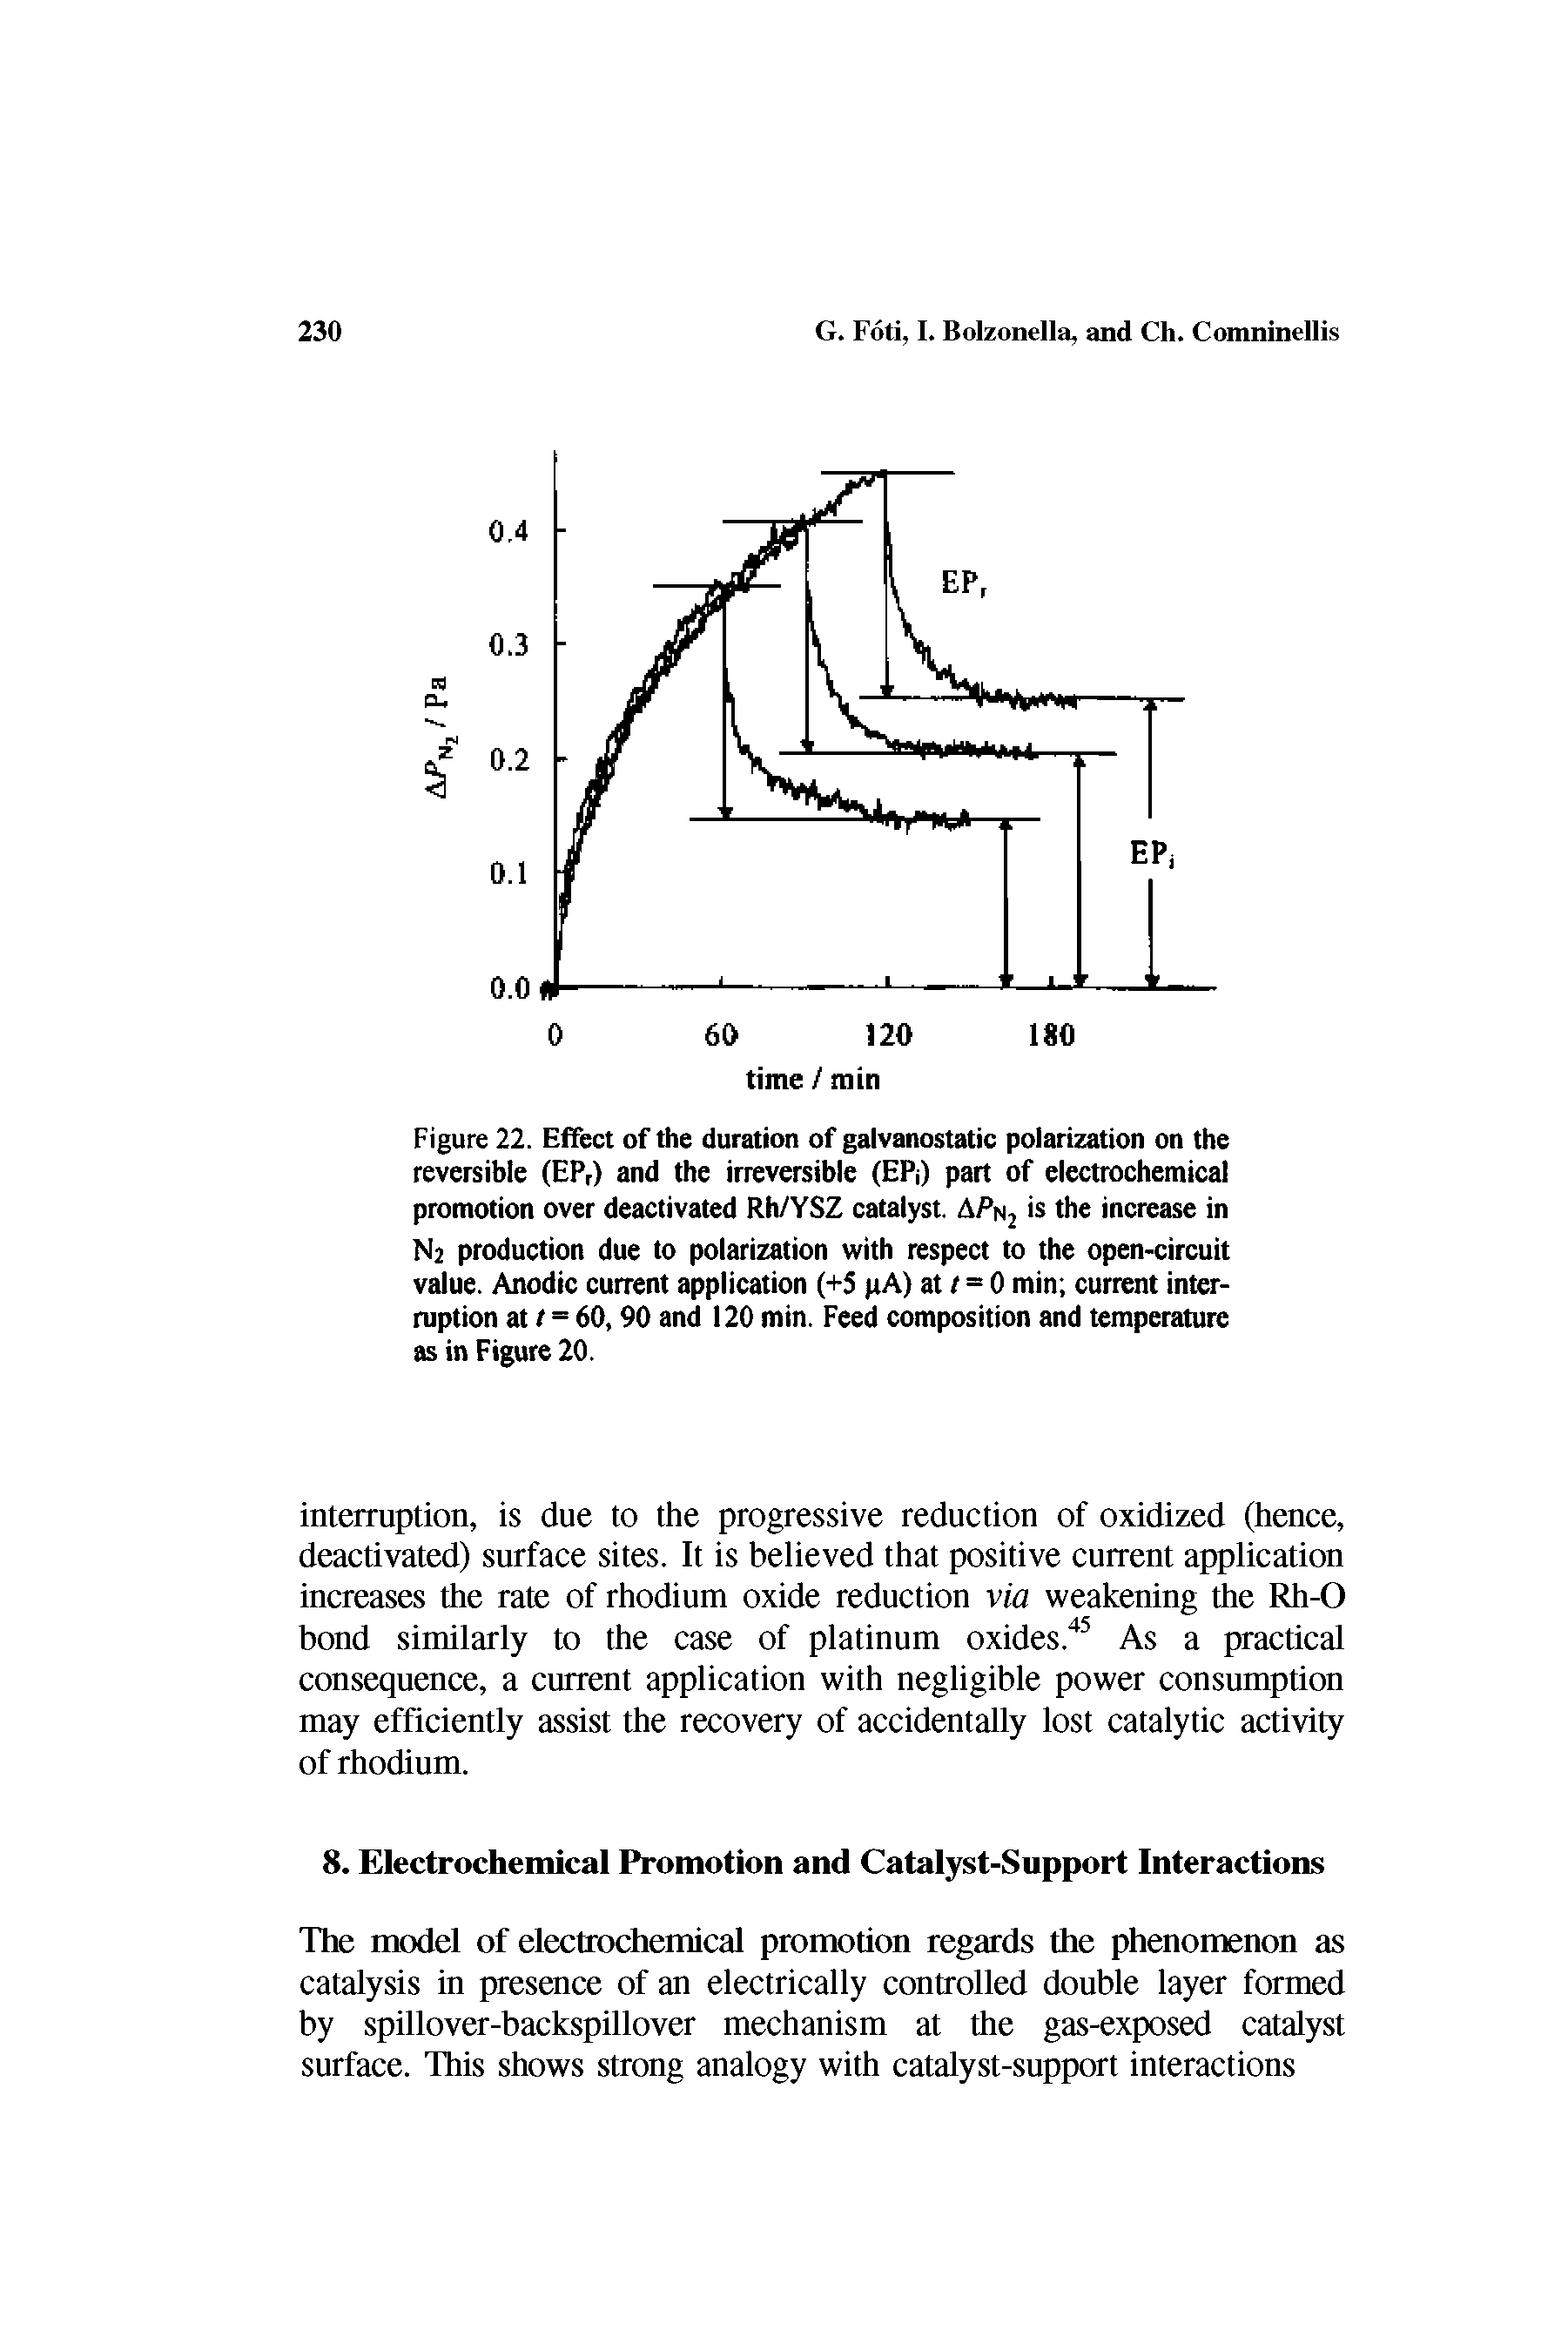 Figure 22. Effect of the duration of galvanostatic polarization on the reversible (EP,) and the irreversible (EP ) part of electrochemical promotion over deactivated Rh/YSZ catalyst. APn2 the increase in N2 production due to polarization with respect to the open-circuit value. Anodic current application (+5 pA) at / = 0 min current interruption at / = 60,90 and 120 min. Feed composition and temperature as in Figure 20.